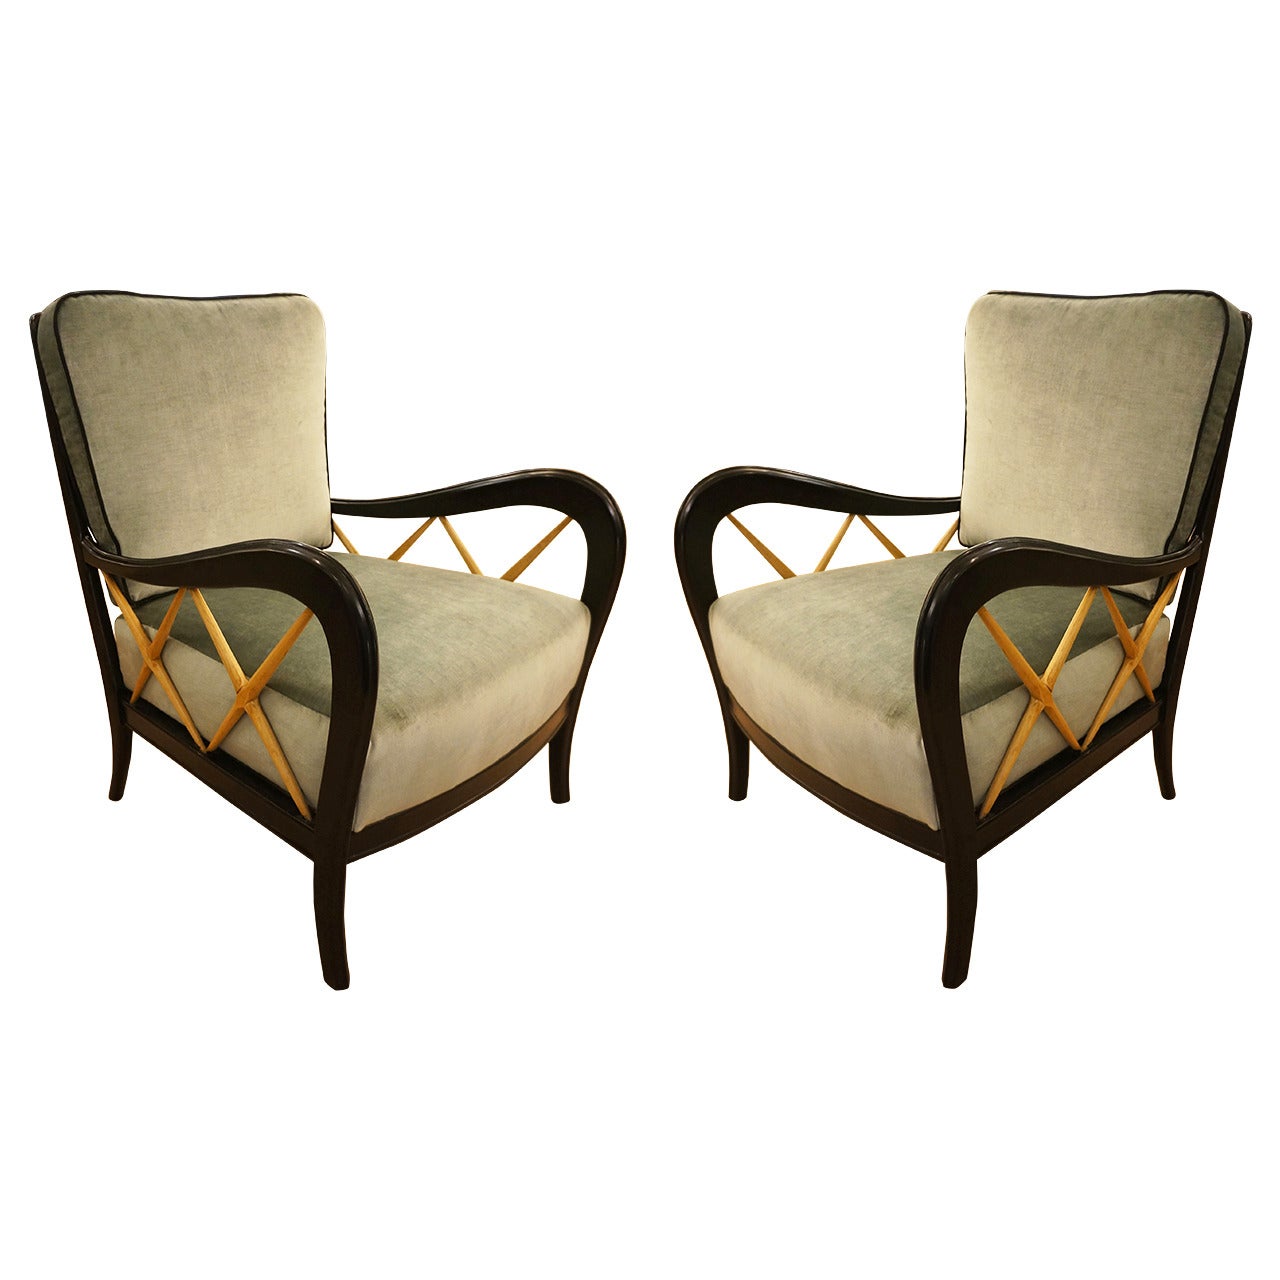 Sculptural Pair of Armchairs Attributed to Paolo Buffa, Italy 1950s